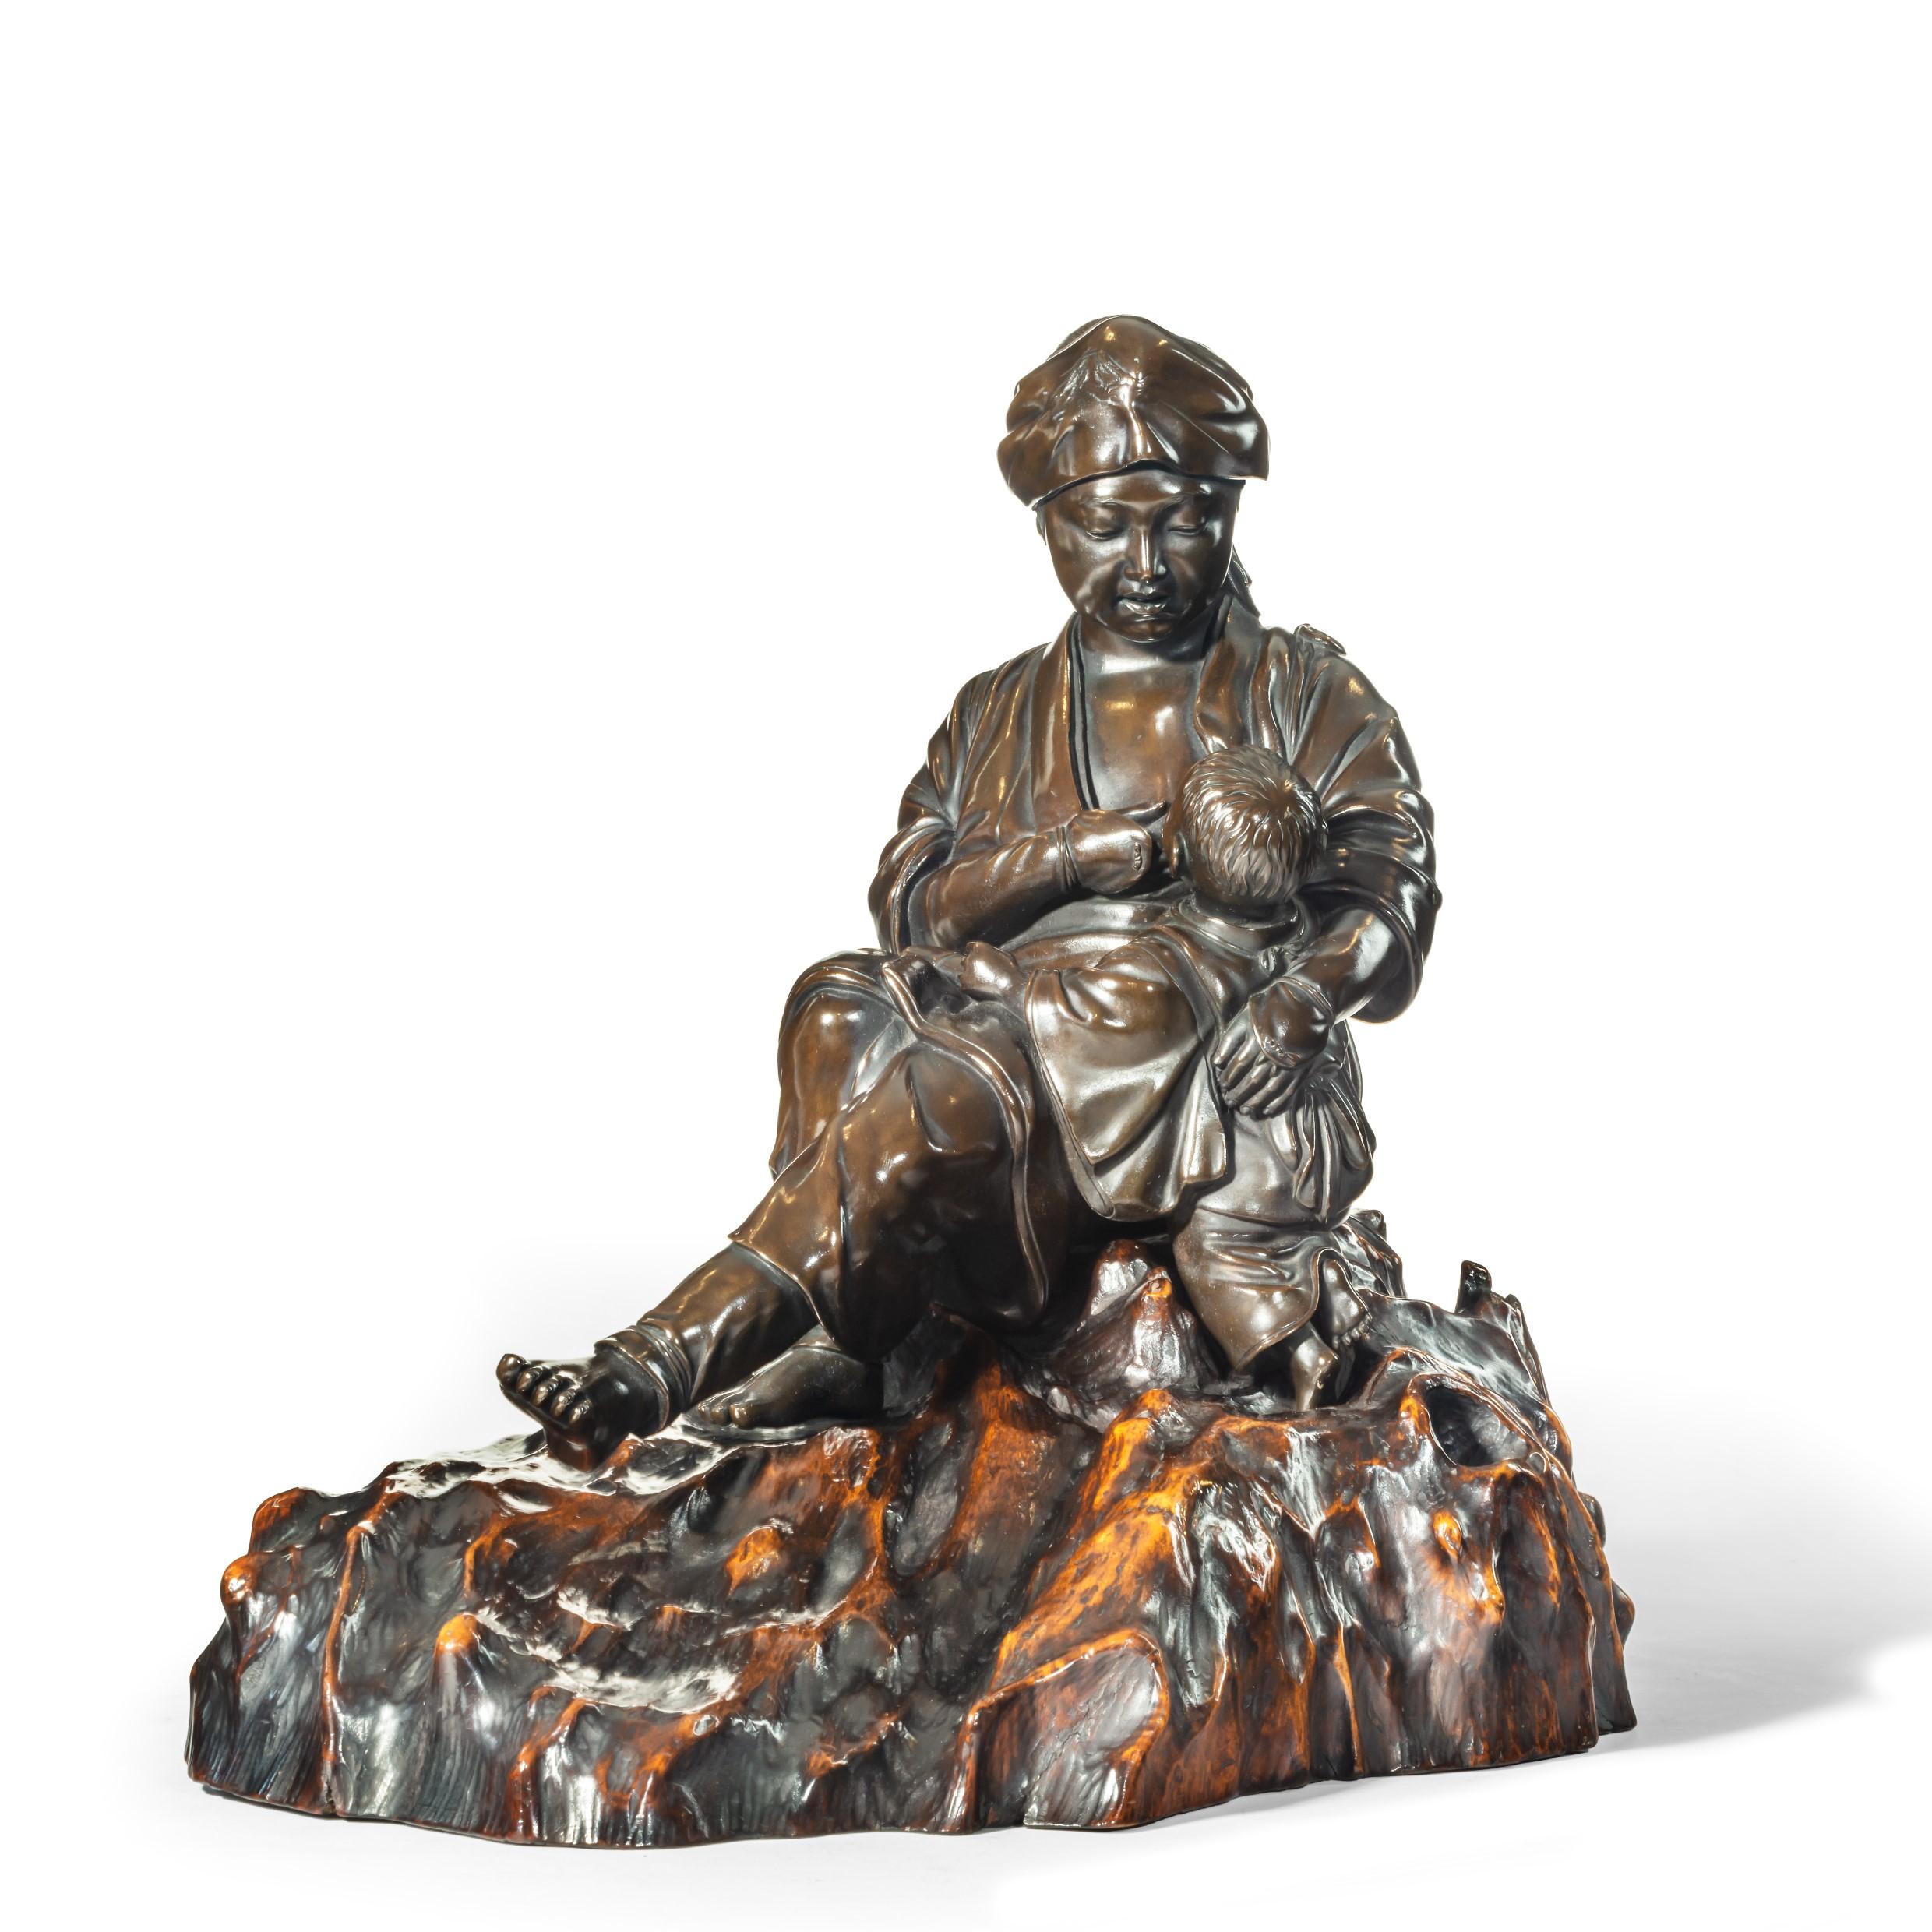 A Meiji period bronze sculpture of a mother and son by Atsuyoshi, she is shown seated on a gnarled rootwood base, with her arm round a crying boy standing by her knee and offering her breast, wearing a short robe, trousers and a cloth incised with